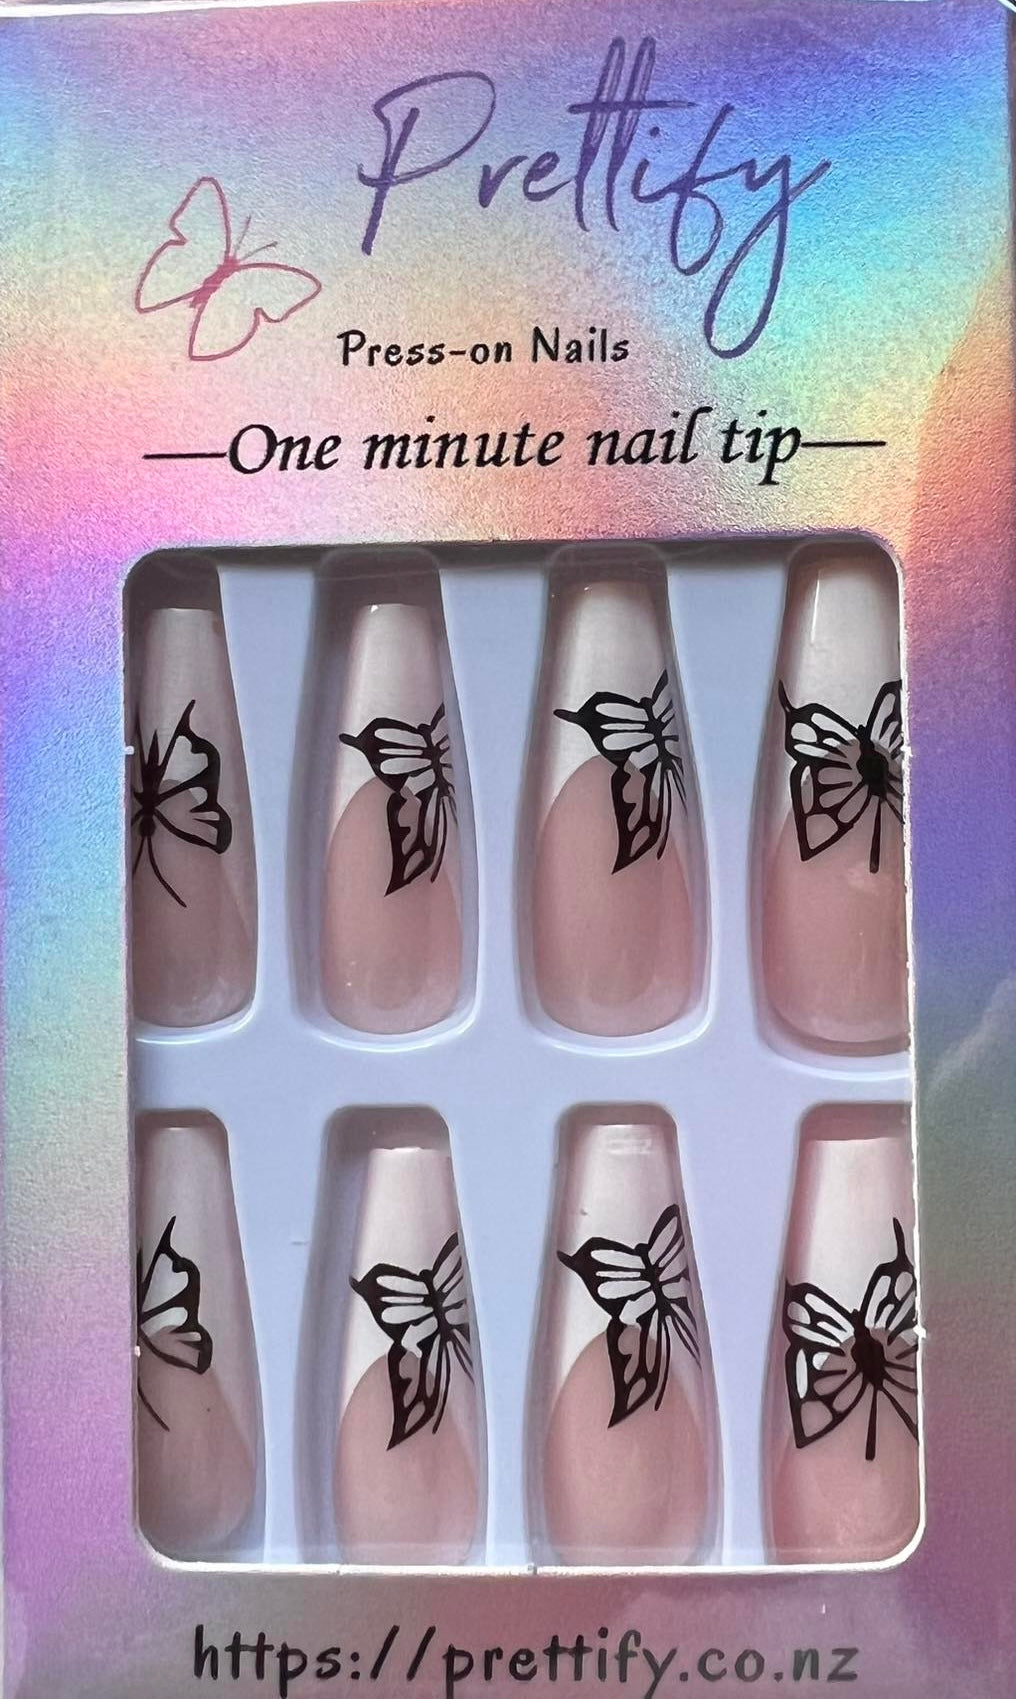 Long Coffin French Tip Press on Nails. White Tips with Butterflies. Easy and quick to apply. Great for those special occasions, parties or add an edge to any outfit. Gorgeous, flattering and you can re-use them again and again.